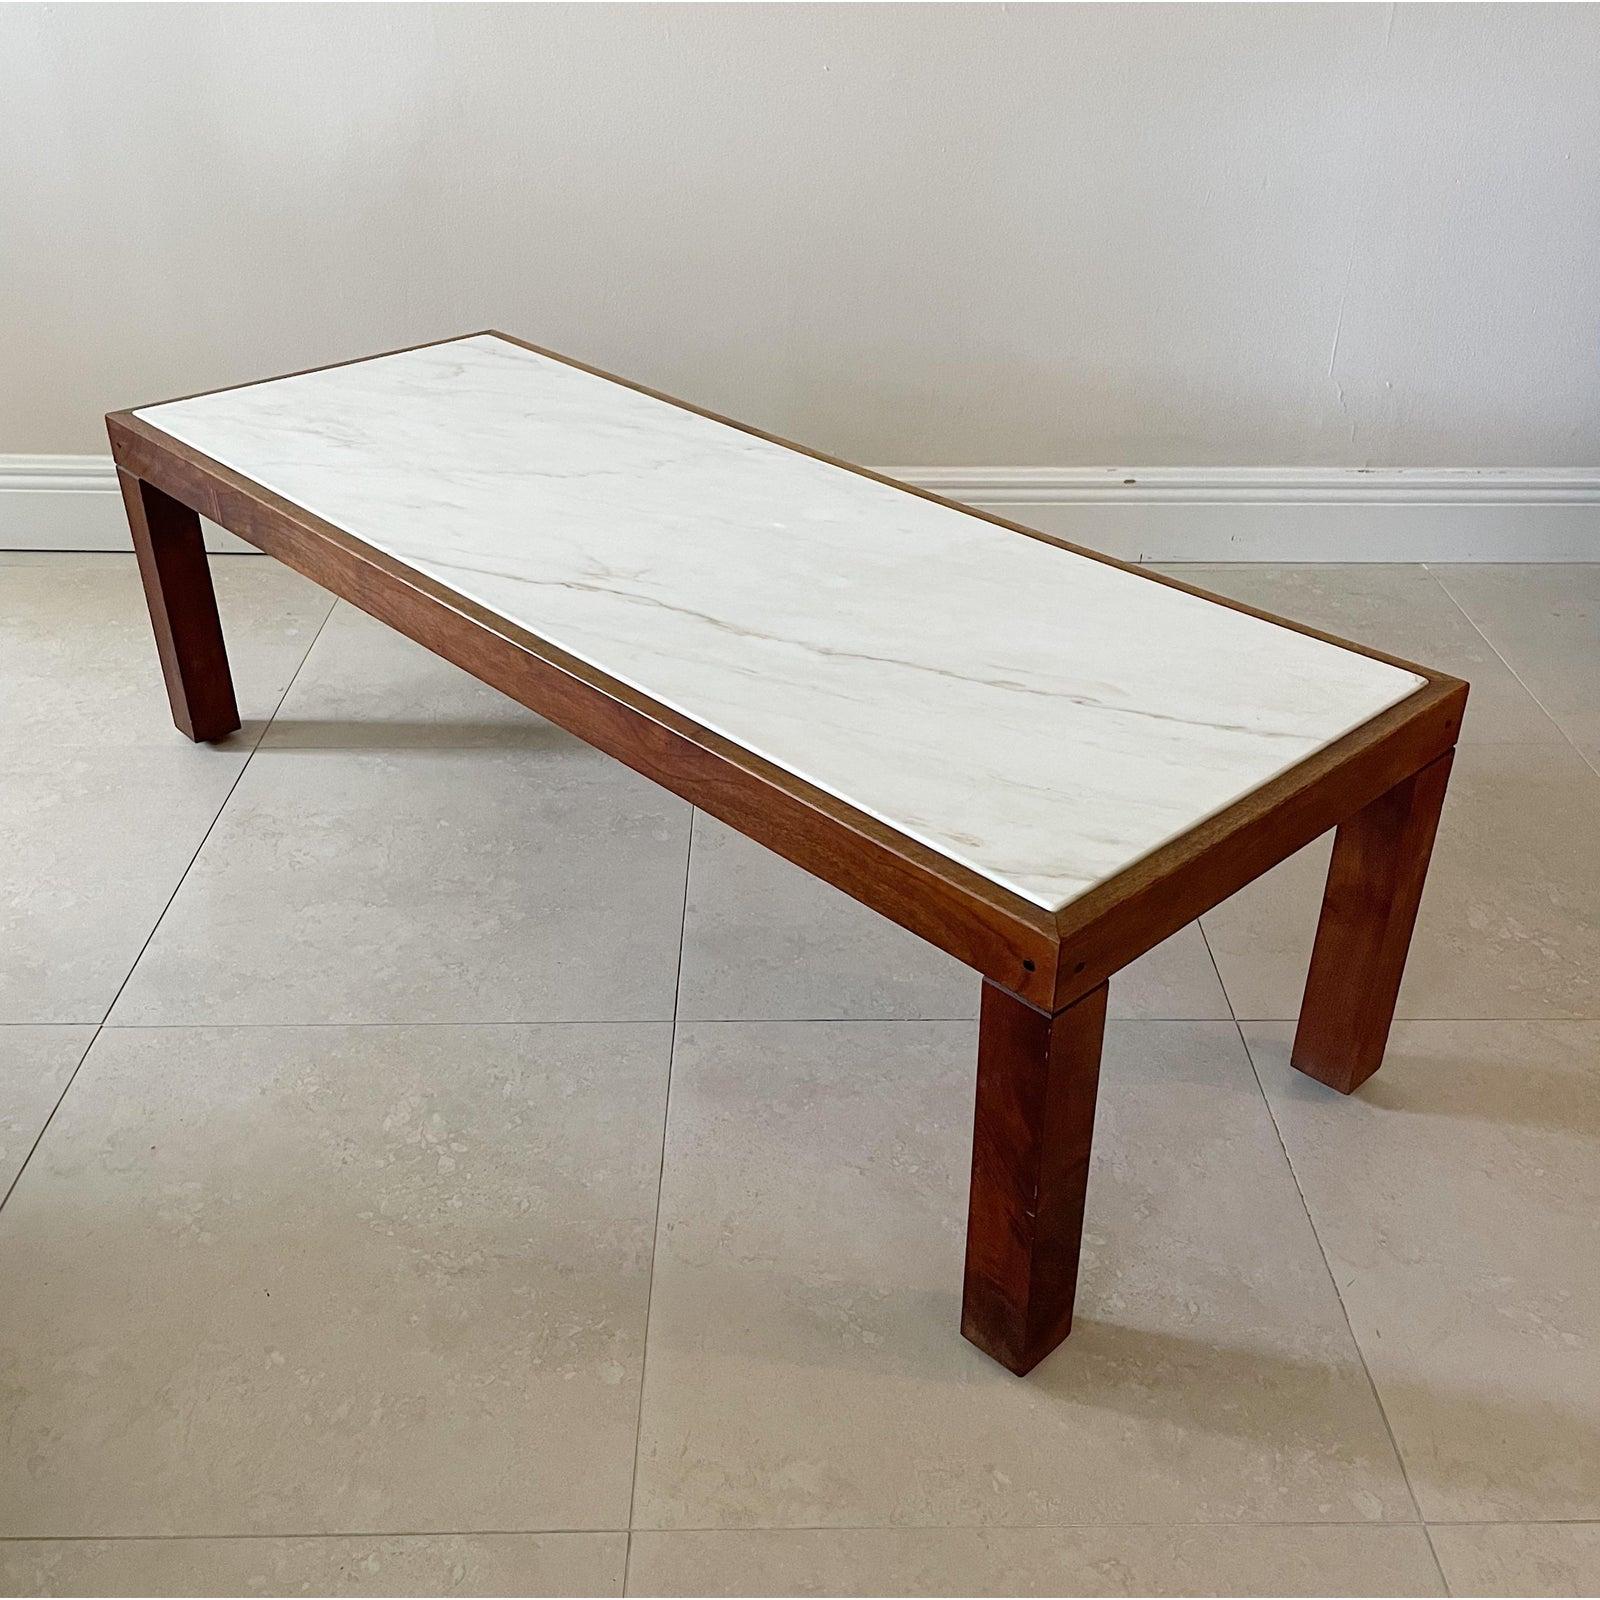 Hand-Crafted Rectangular Wood and White Marble Vintage Coffee Table